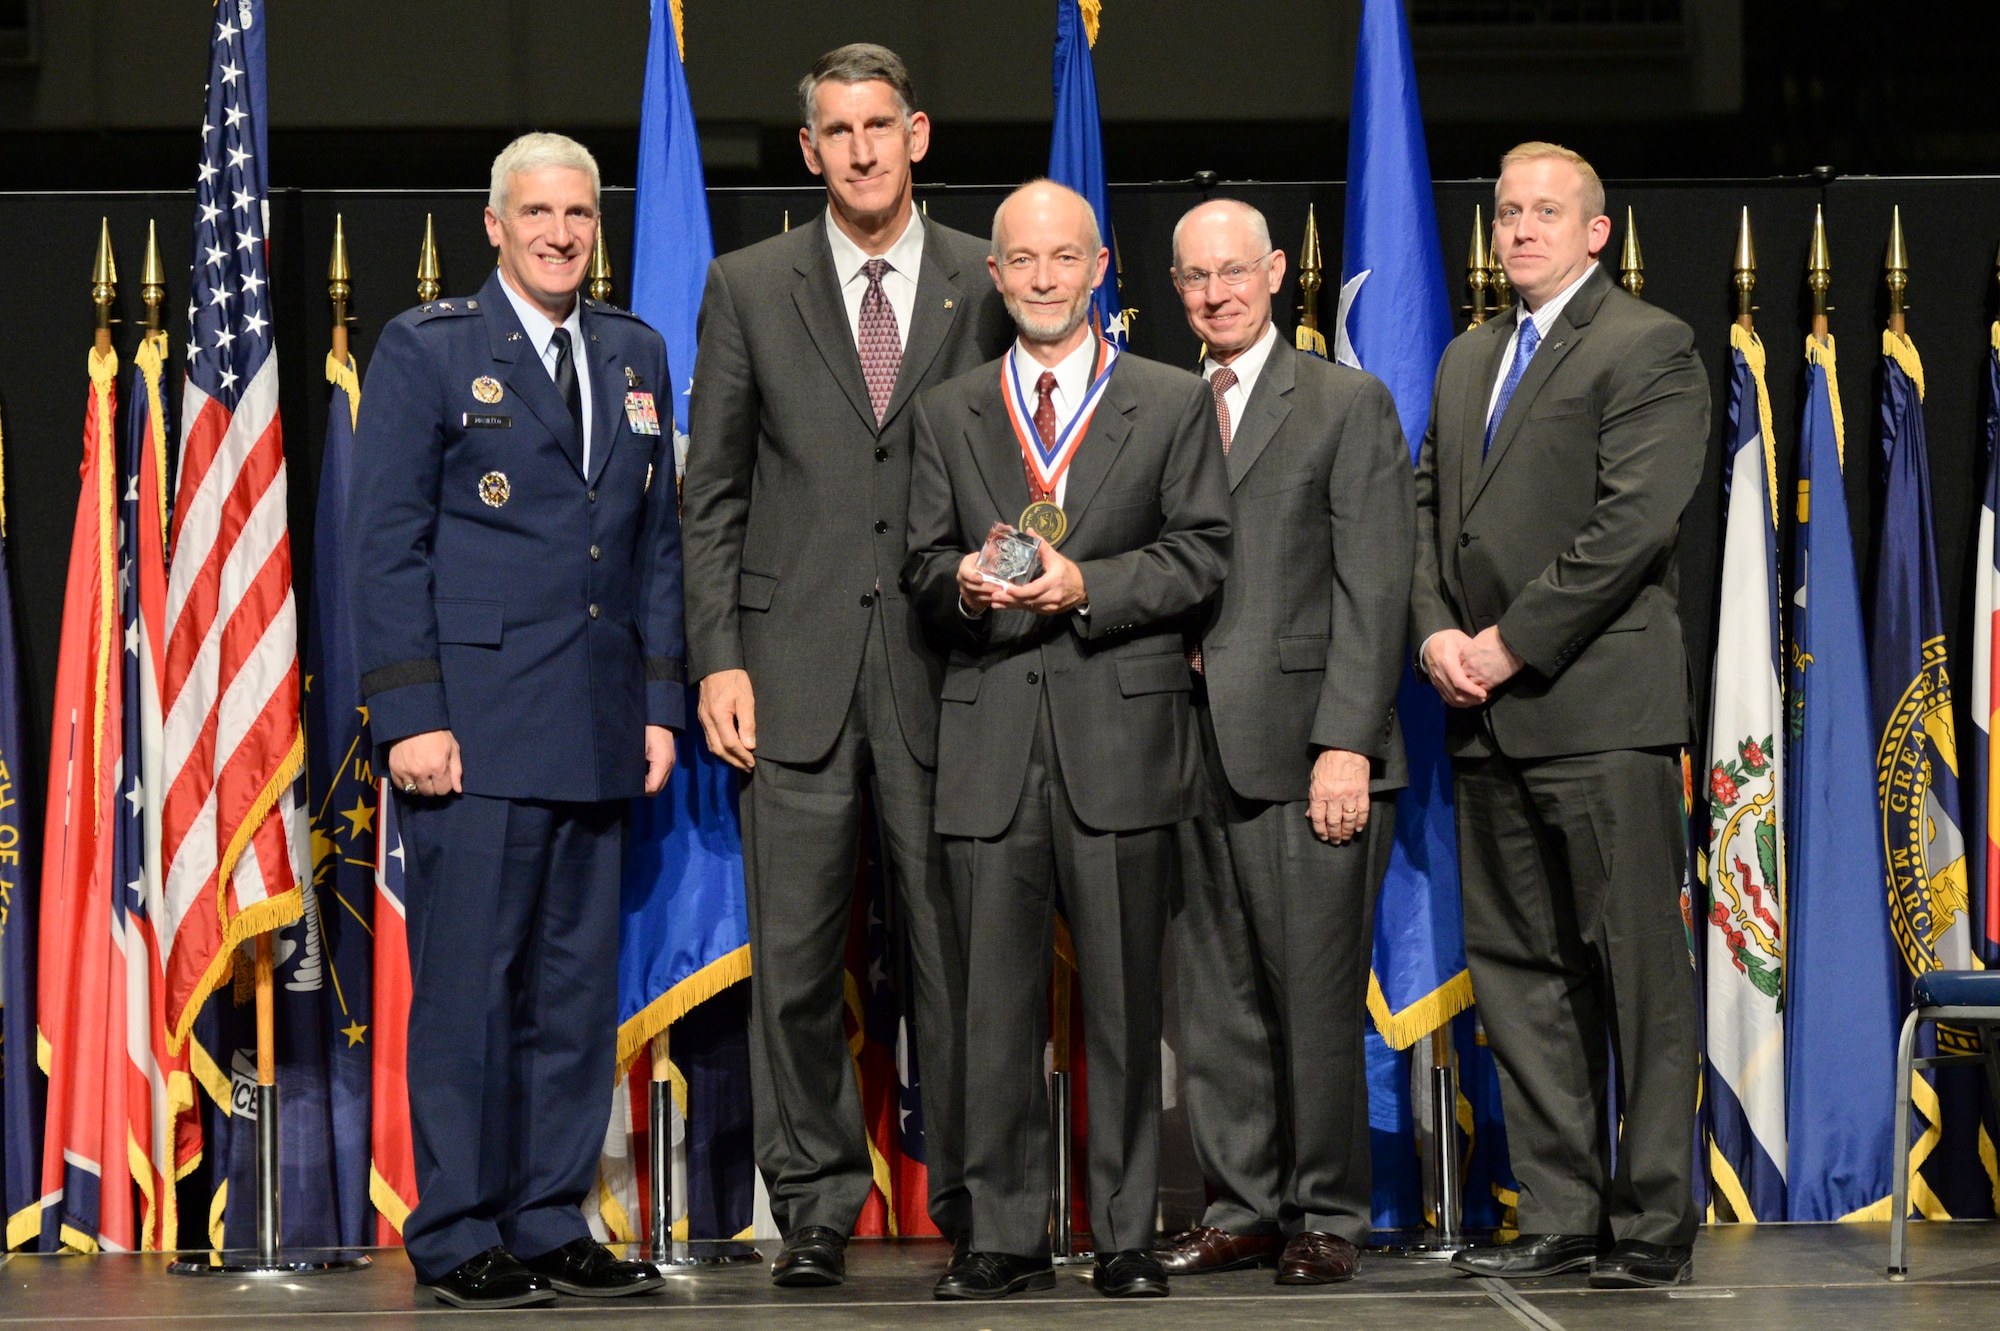 Dr. Gregory Vansuch, technical advisor, Systems Technology Office, Air Force Research Laboratory Sensors Directorate, is honored during the 2014 AFRL Fellows and Early Career Awards Banquet Oct. 30 at the National Museum of the U.S. Air Force,  Joining him are Maj. Gen. Tom Masiello, AFRL commander, Dr. Vansuch's mentor, Dr. Gregory Schneider, retired AFRL commander, Maj. Gen. Dick Paul, and Dr. Morley Stone, AFRL chief technology officer. (U.S. Air Force photo/Wesley Farnsworth) 